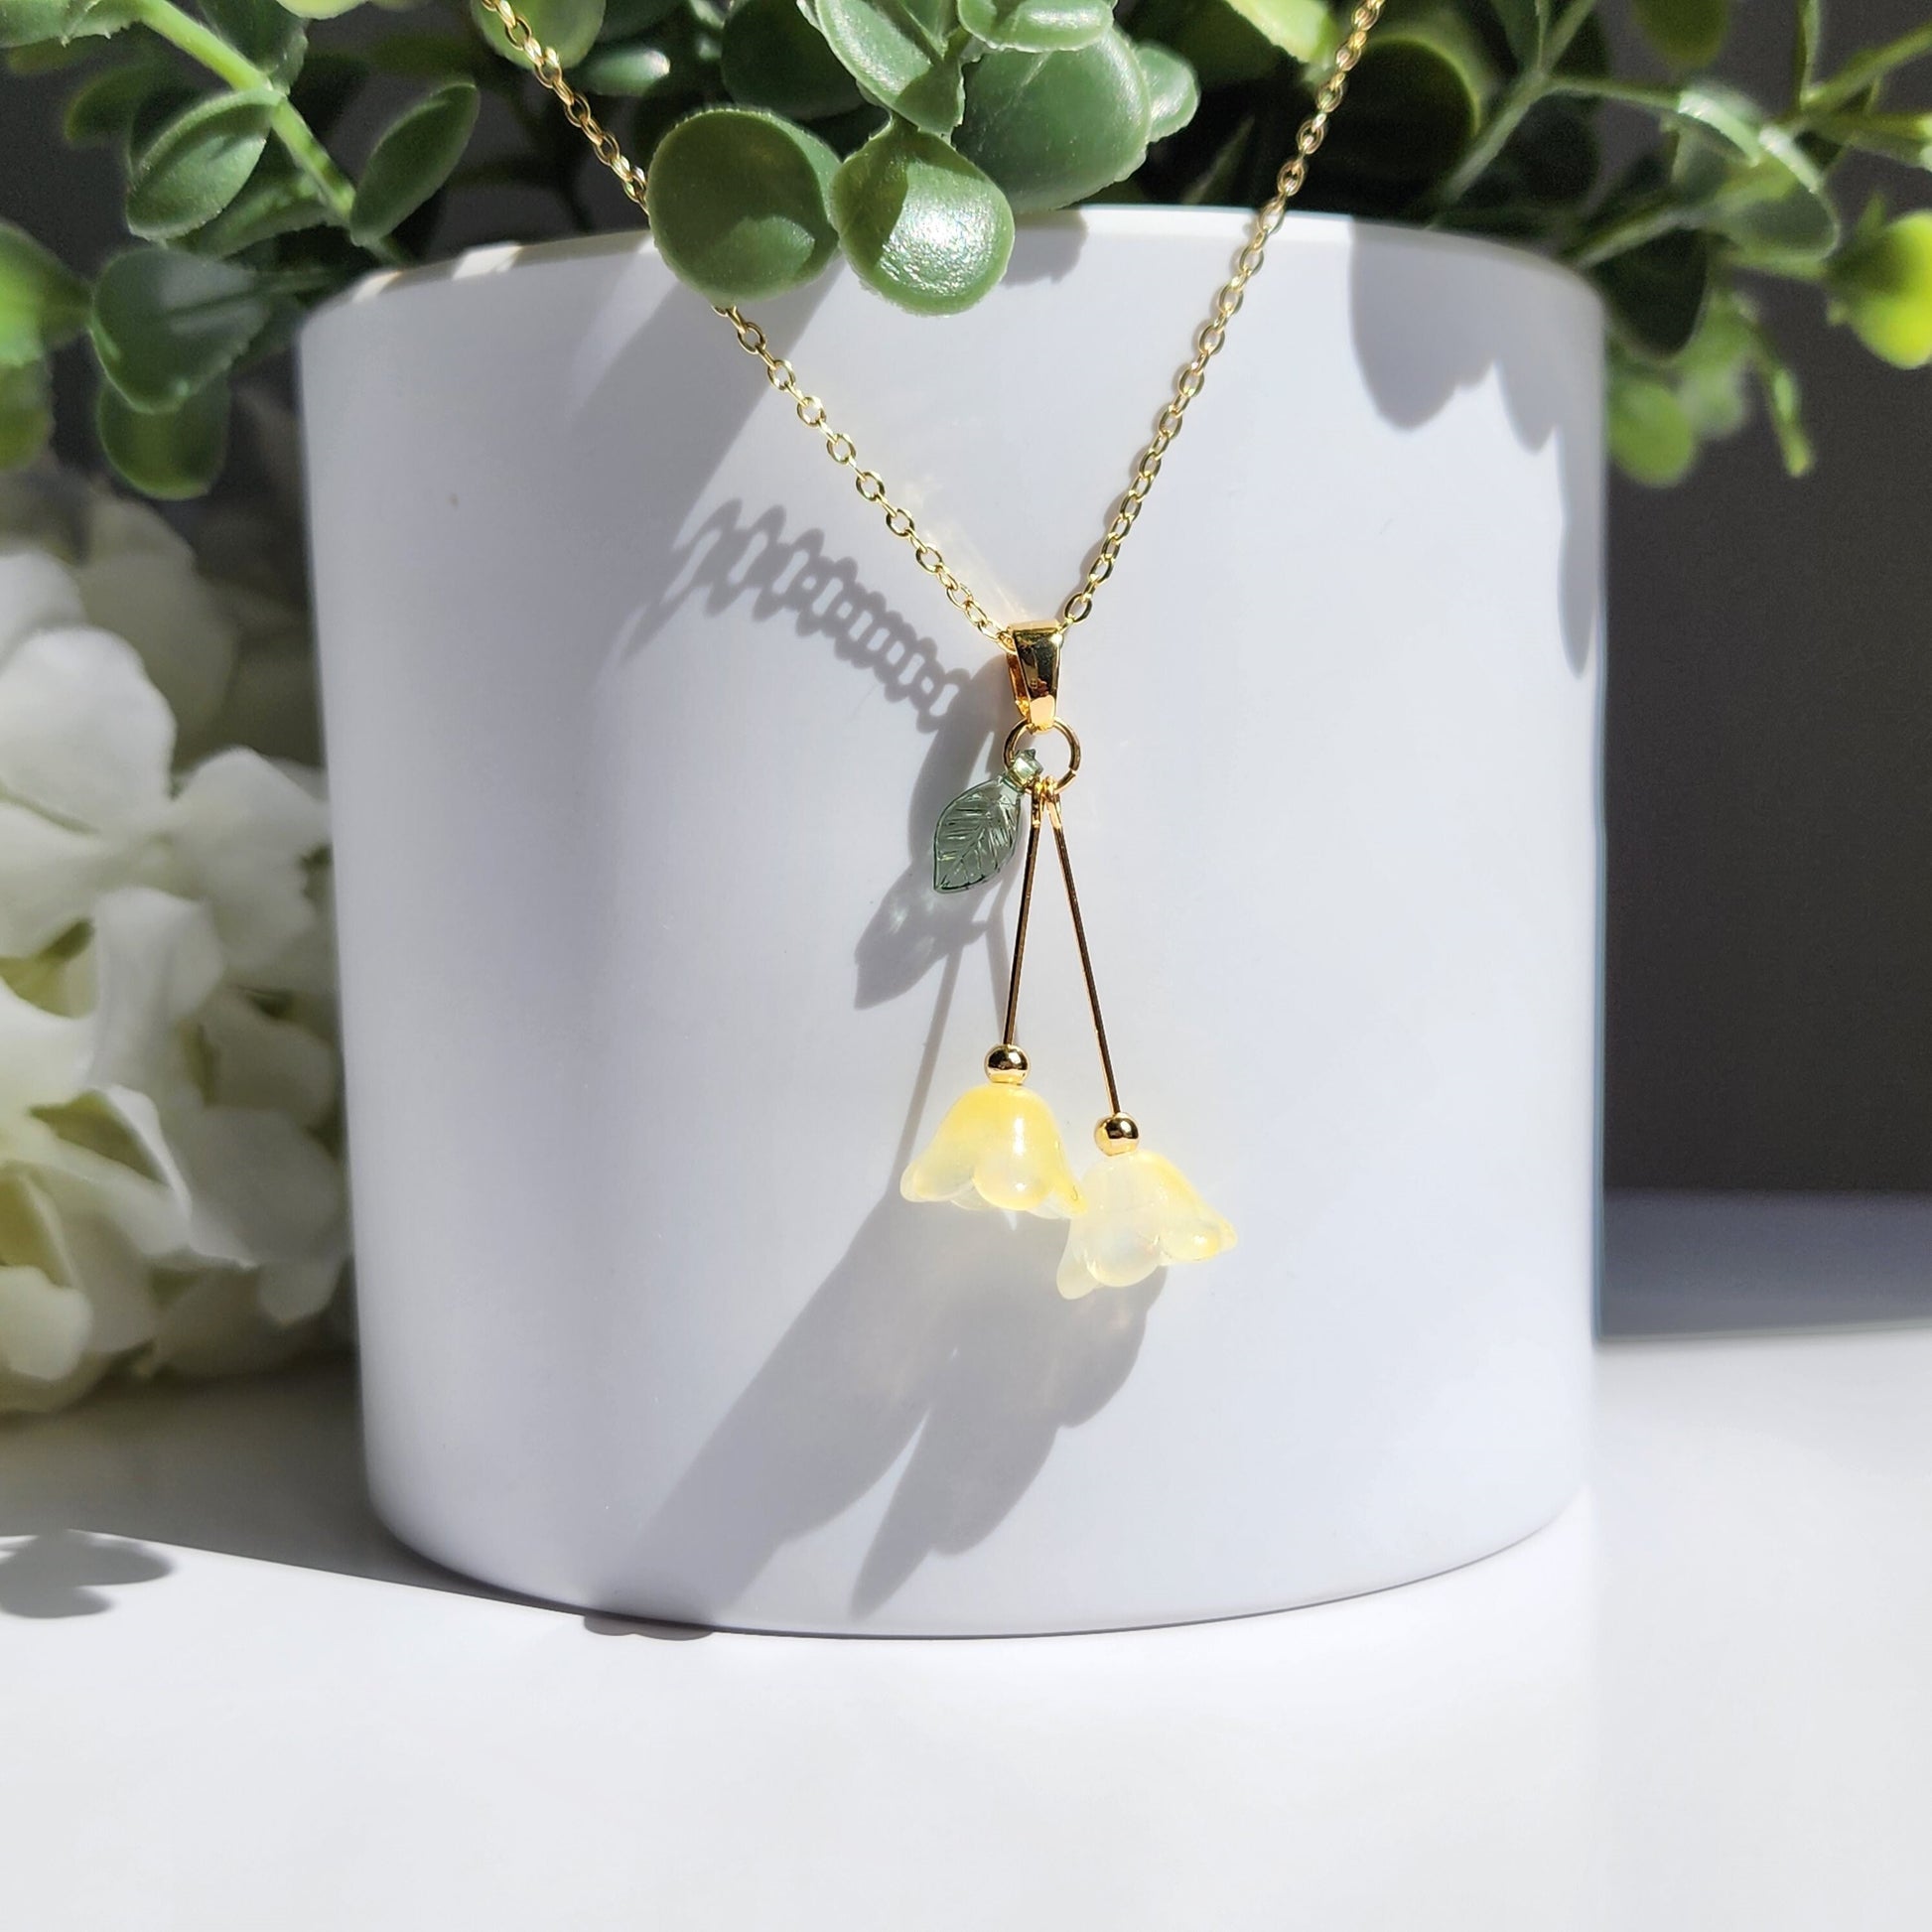 Lily of the valley necklace, Lily flower necklace, Gift for her